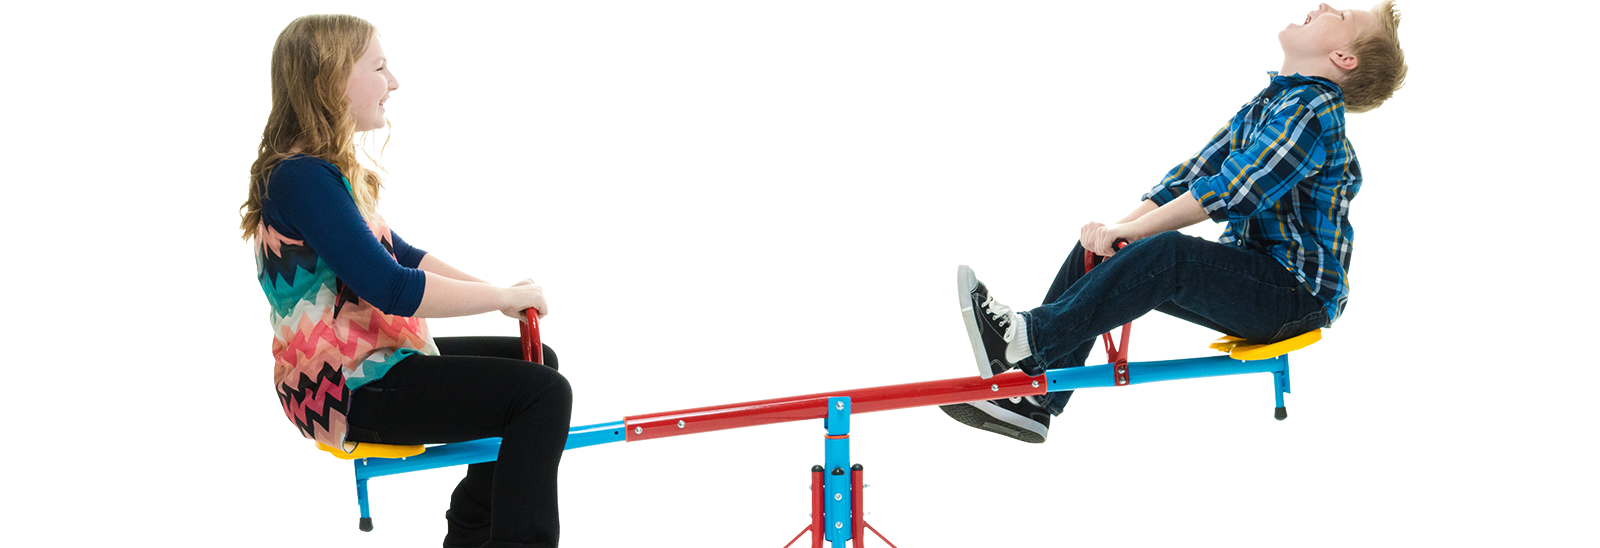 Photo of children playing on teeter totter 